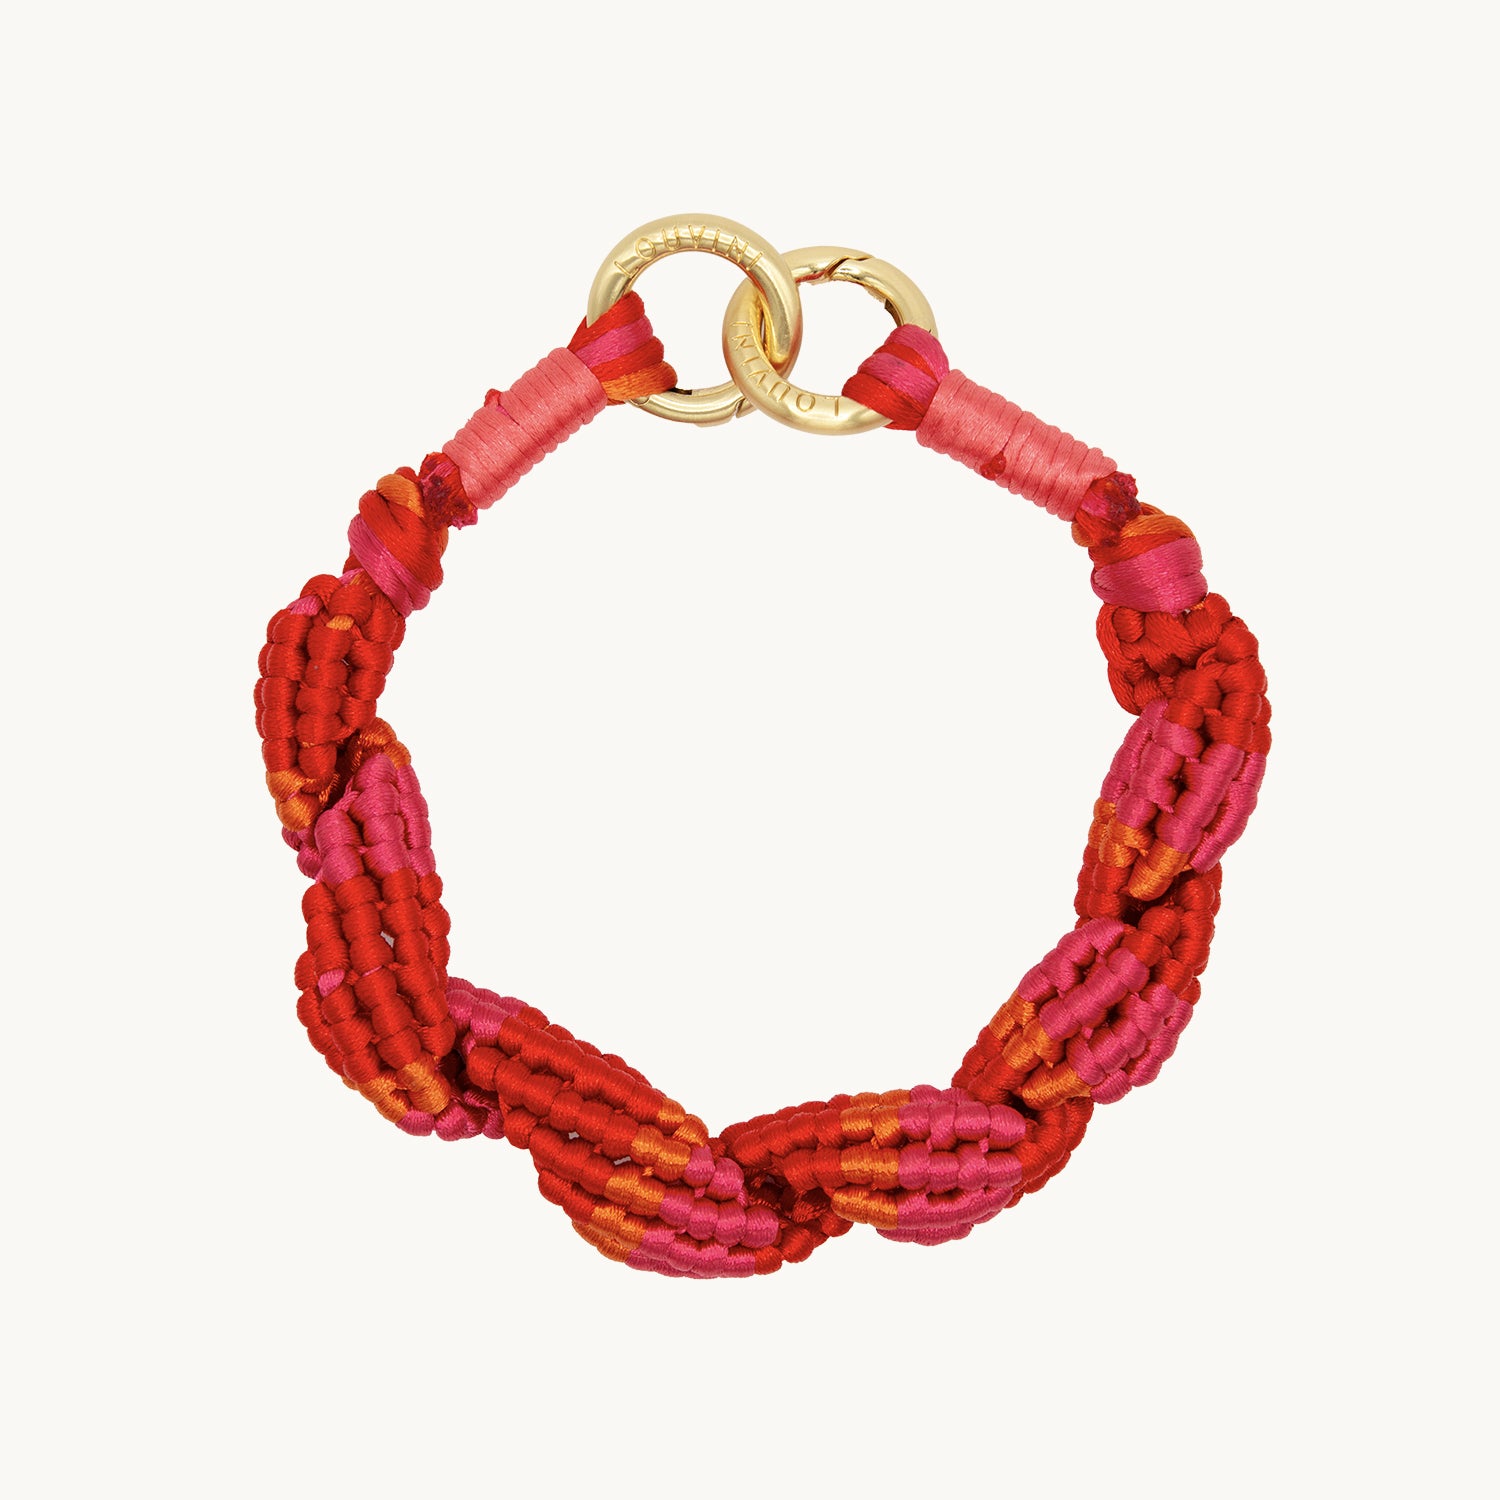 SPECIAL EDITION: LAYLA x YASSS Woven Cord